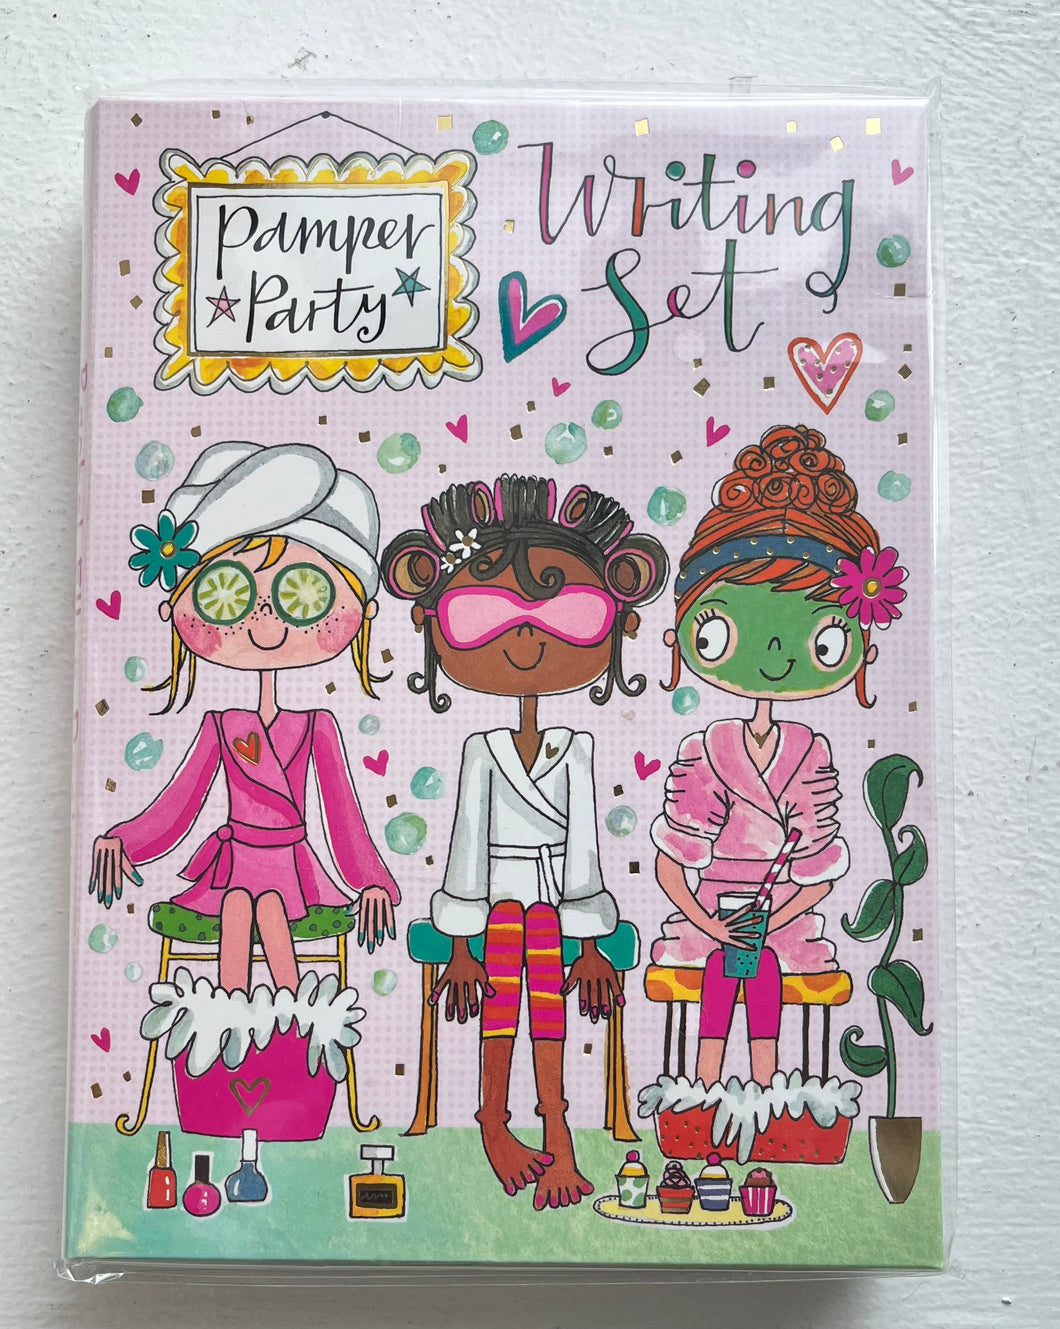 Pamper Party Writing Set Wallet